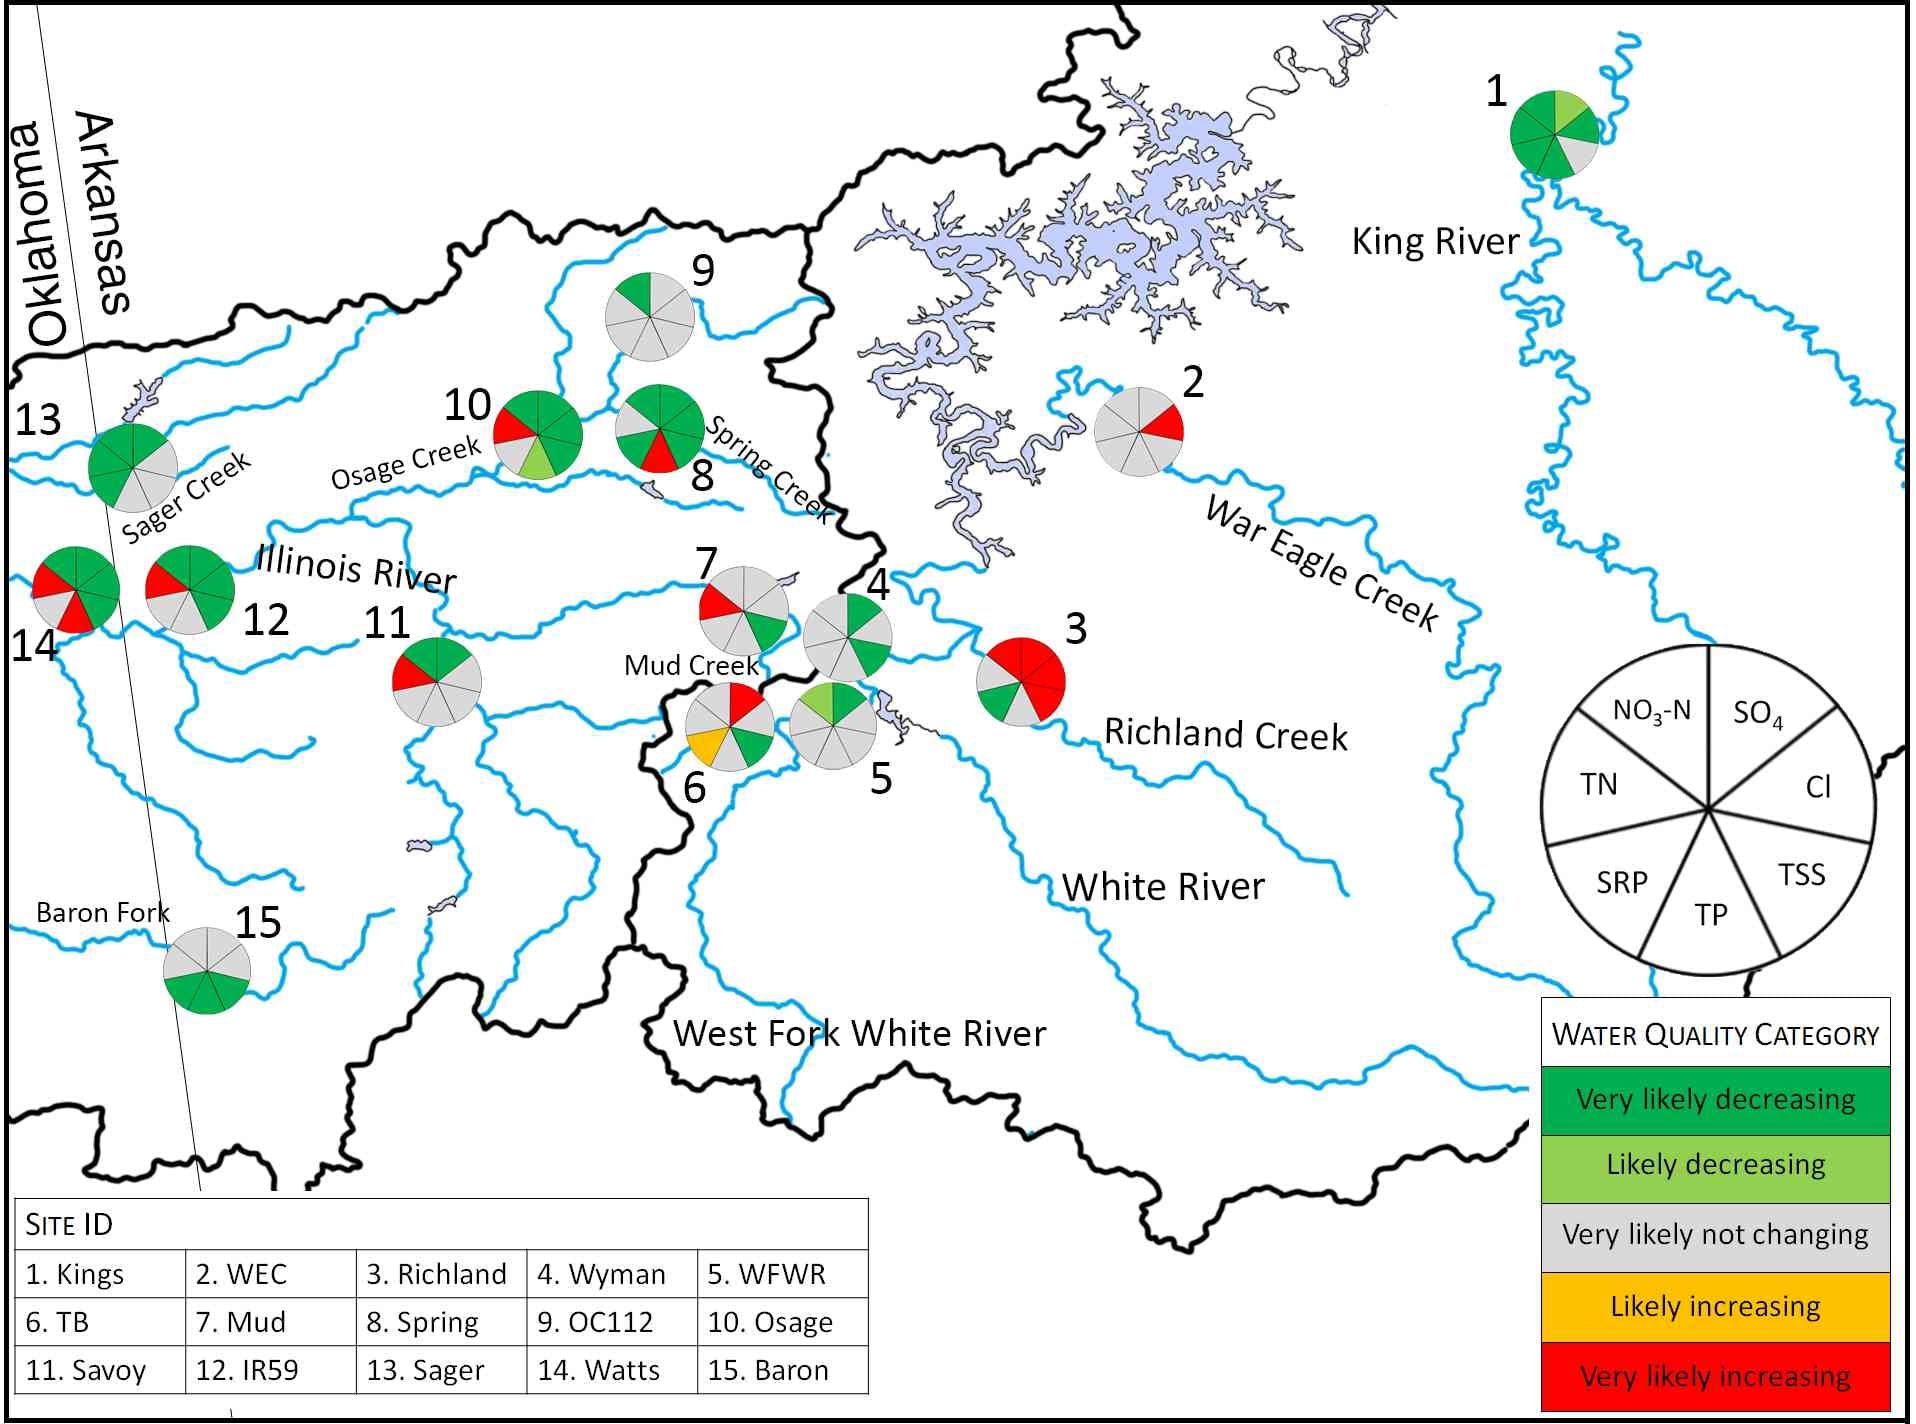 Map of the UWRB and UIRW in Arkansas showing water-quality trends for several parameters. SO4=Sulfate; Cl=Chloride; TSS=Total Suspended Solids; TP=Total Phosphorus; SRP=Soluble Reactive Phosphorus; TN=Total Nitrogen; NO3-N=Nitrate. 